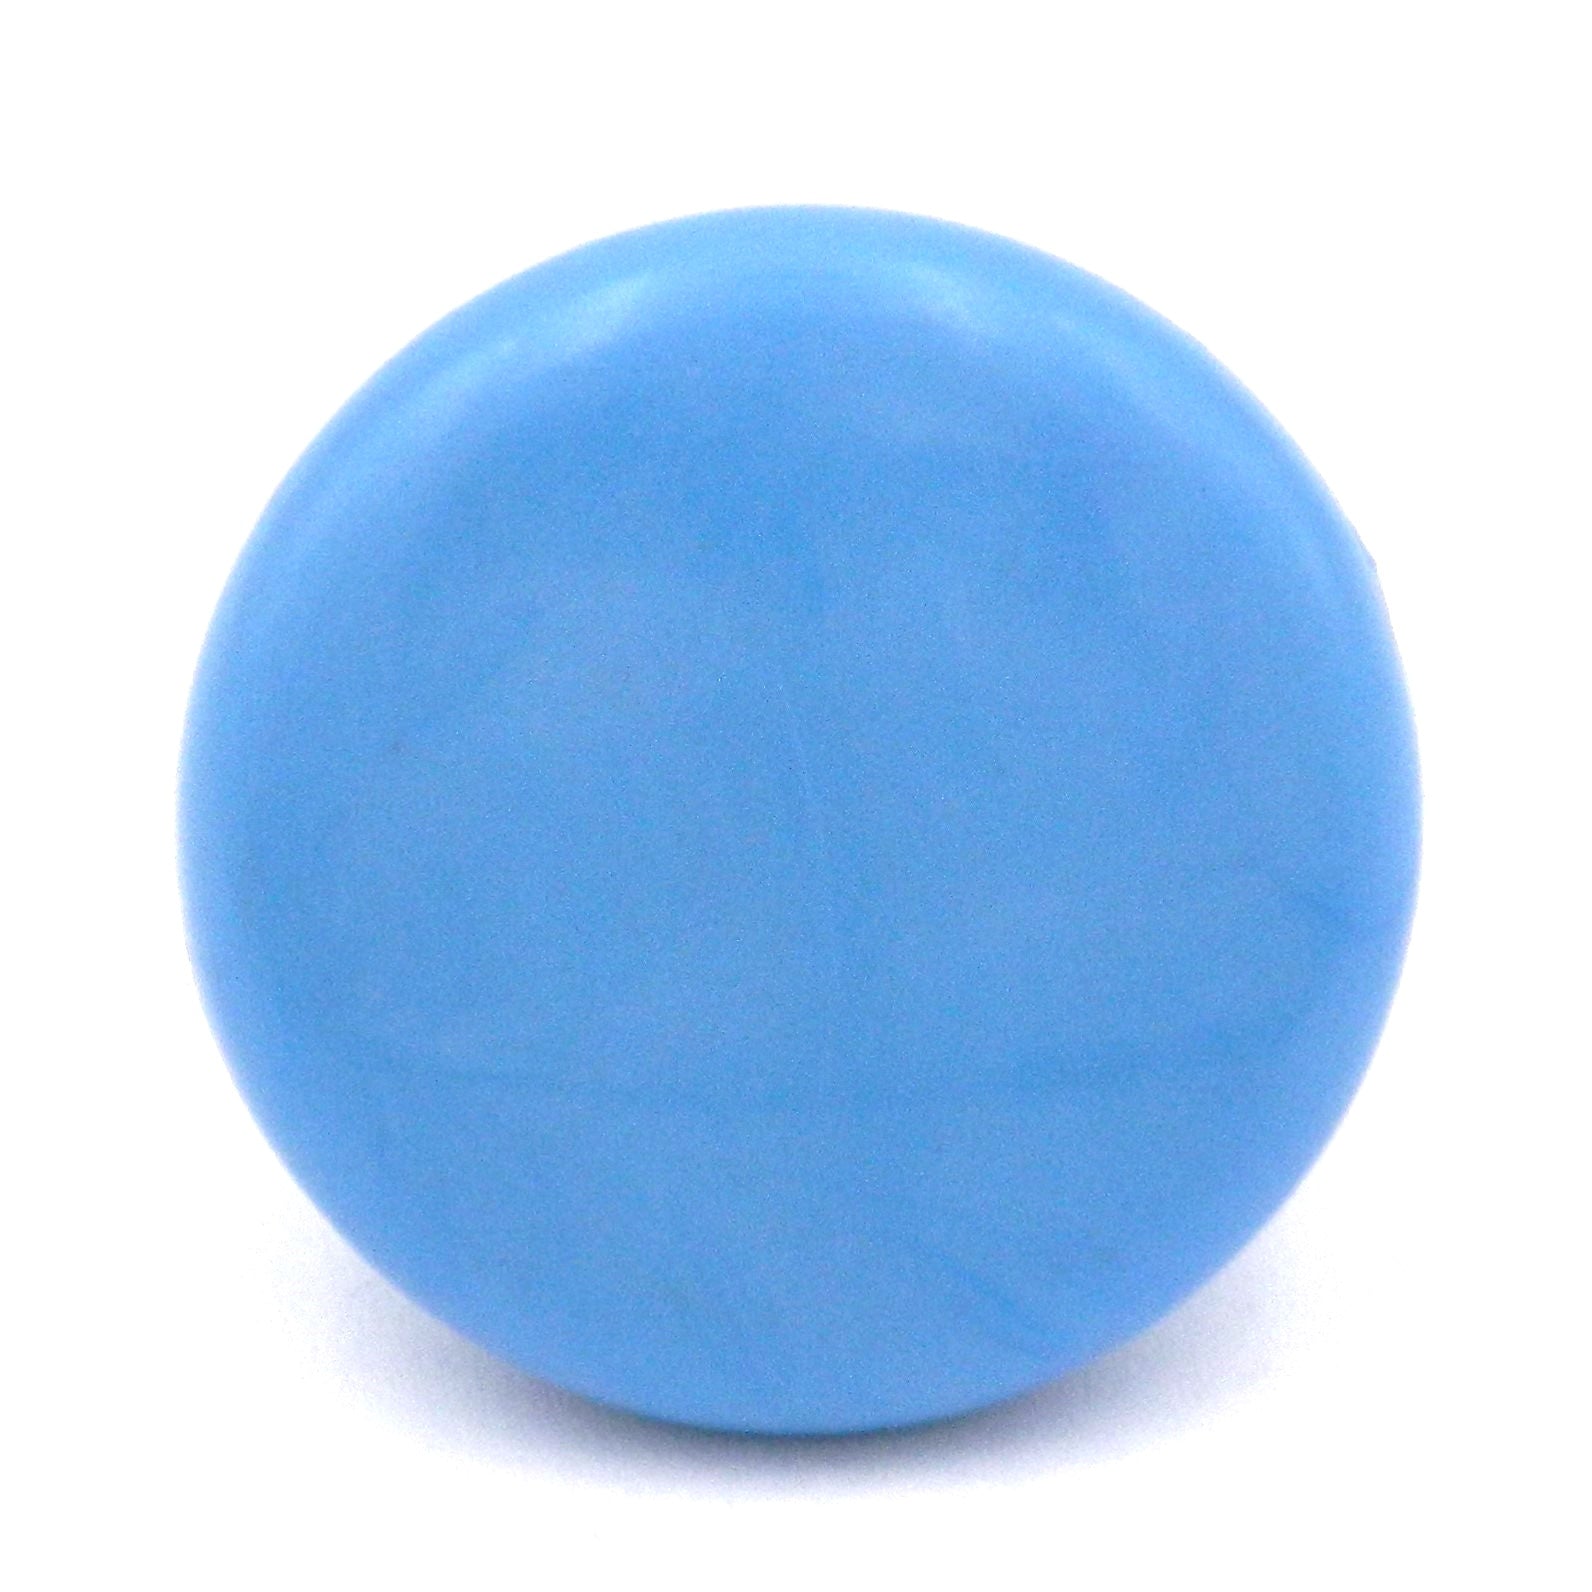 Hickory Hardware Midway 1 1/2" Lustre Blue Round Smooth Plastic Cabinet Knob P826-LB